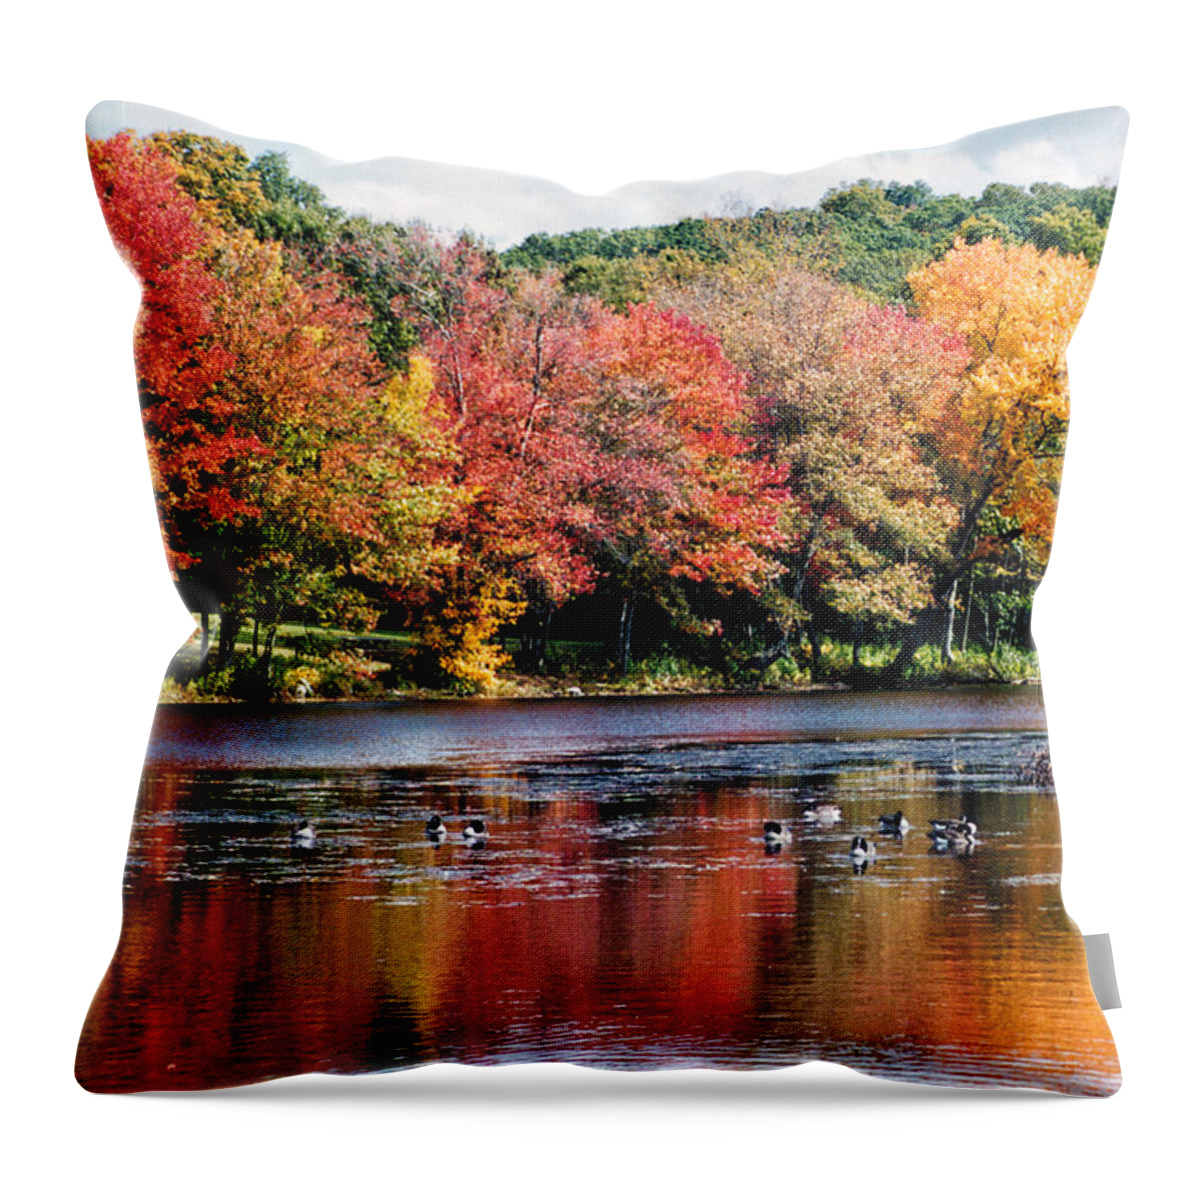 Scenic Throw Pillow featuring the photograph Autumn Pond by William Selander